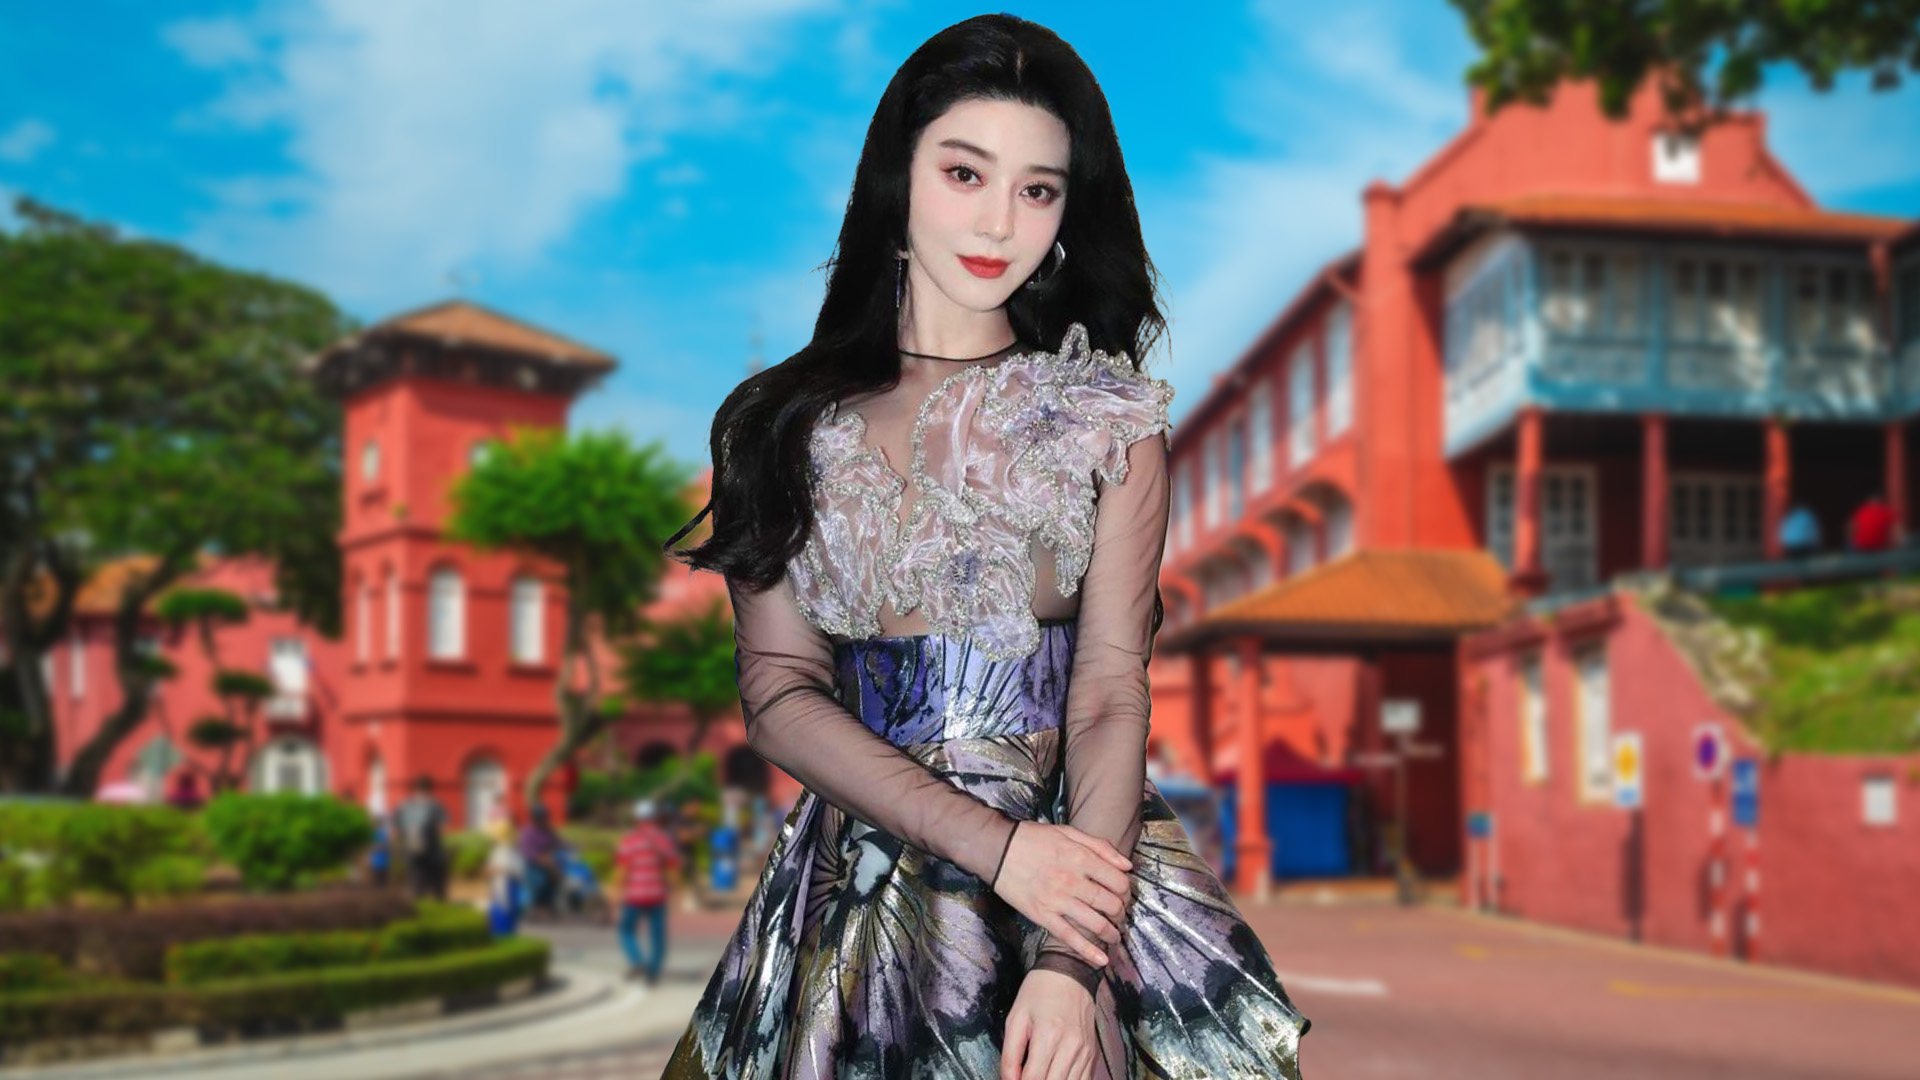 Chinese actress Fan Bingbing is struggling to shake off concerns about her tax affairs despite her recent appointment as a tourism ambassador for the Malaysian state of Malacca. Photo: SCMP composite/Shutterstock/Instagram